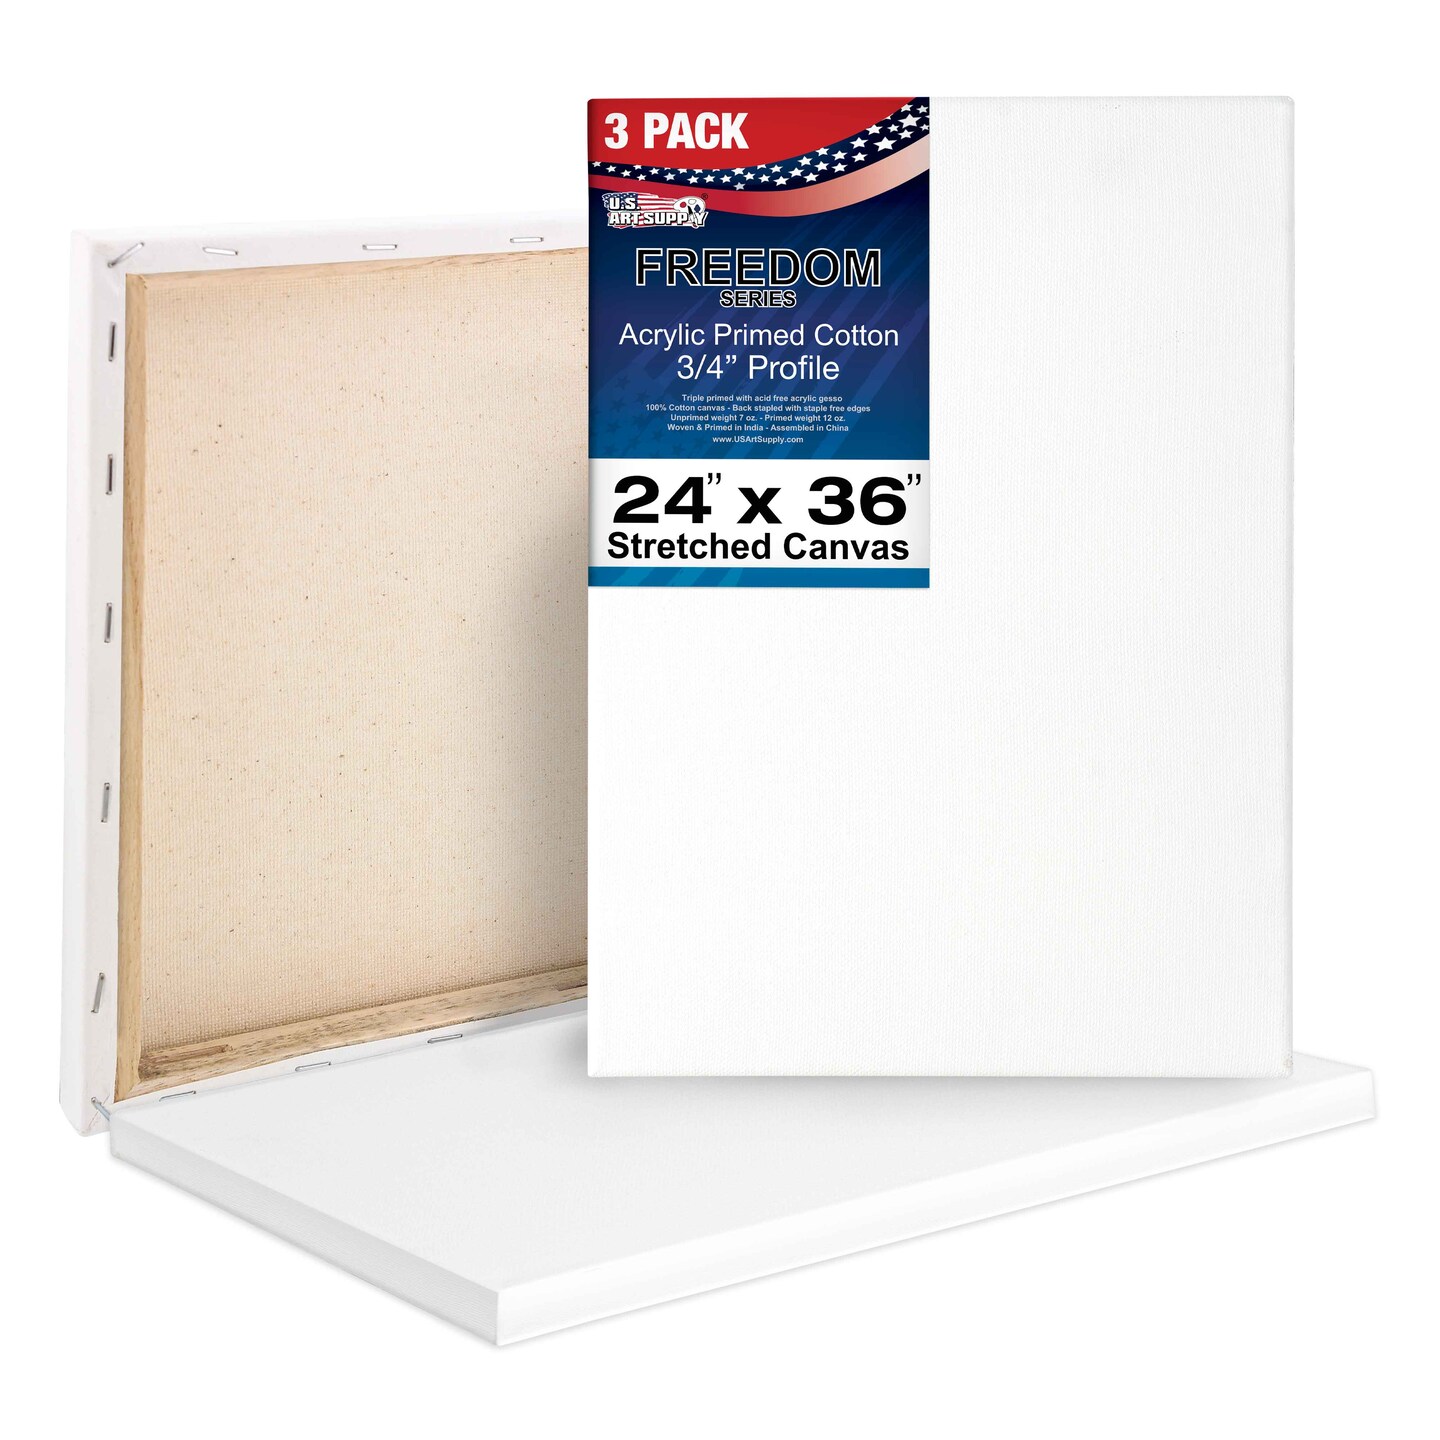 Stretched Canvas 11x14 10 Pack 10 oz. Triple Primed, Professional Artist  White Canvas, 100% Cotton, Art Supplies for Crafts, Gesso-Primed for Oil,  Acrylic & Pouring Art by WholesaleArtsFrames-com 